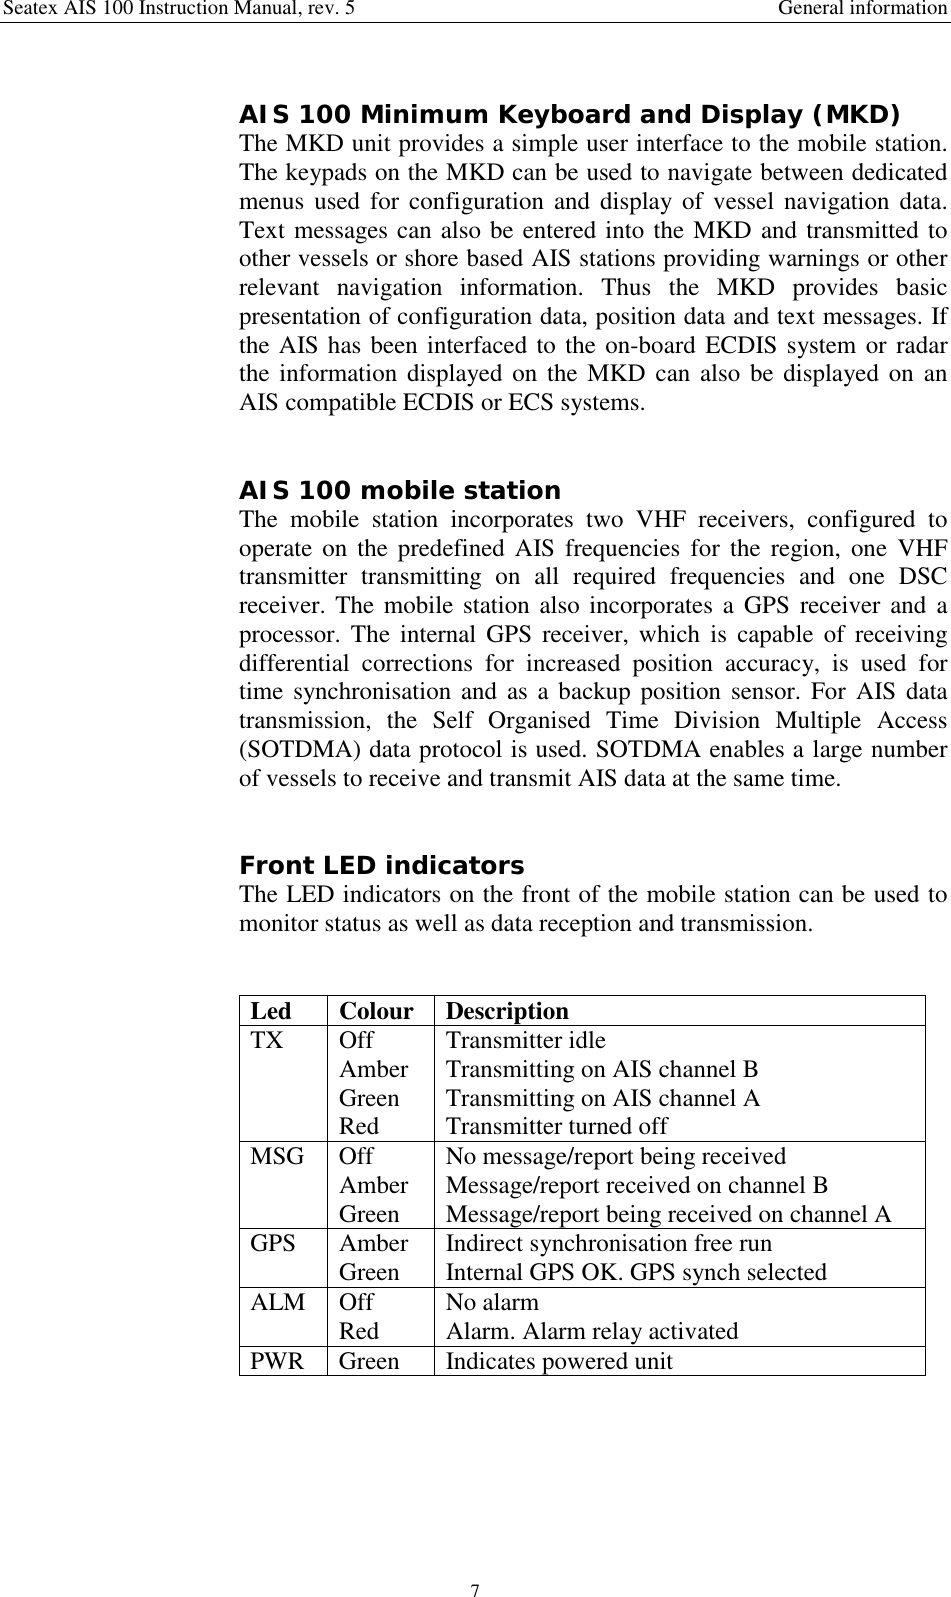 Seatex AIS 100 Instruction Manual, rev. 5 General information7AIS 100 Minimum Keyboard and Display (MKD)The MKD unit provides a simple user interface to the mobile station.The keypads on the MKD can be used to navigate between dedicatedmenus used for configuration and display of vessel navigation data.Text messages can also be entered into the MKD and transmitted toother vessels or shore based AIS stations providing warnings or otherrelevant navigation information. Thus the MKD provides basicpresentation of configuration data, position data and text messages. Ifthe AIS has been interfaced to the on-board ECDIS system or radarthe information displayed on the MKD can also be displayed on anAIS compatible ECDIS or ECS systems.AIS 100 mobile stationThe mobile station incorporates two VHF receivers, configured tooperate on the predefined AIS frequencies for the region, one VHFtransmitter transmitting on all required frequencies and one DSCreceiver. The mobile station also incorporates a GPS receiver and aprocessor. The internal GPS receiver, which is capable of receivingdifferential corrections for increased position accuracy, is used fortime synchronisation and as a backup position sensor. For AIS datatransmission, the Self Organised Time Division Multiple Access(SOTDMA) data protocol is used. SOTDMA enables a large numberof vessels to receive and transmit AIS data at the same time.Front LED indicatorsThe LED indicators on the front of the mobile station can be used tomonitor status as well as data reception and transmission.Led Colour DescriptionTX OffAmberGreenRedTransmitter idleTransmitting on AIS channel BTransmitting on AIS channel ATransmitter turned offMSG OffAmberGreenNo message/report being receivedMessage/report received on channel BMessage/report being received on channel AGPS AmberGreen Indirect synchronisation free runInternal GPS OK. GPS synch selectedALM OffRed No alarmAlarm. Alarm relay activatedPWR Green Indicates powered unit